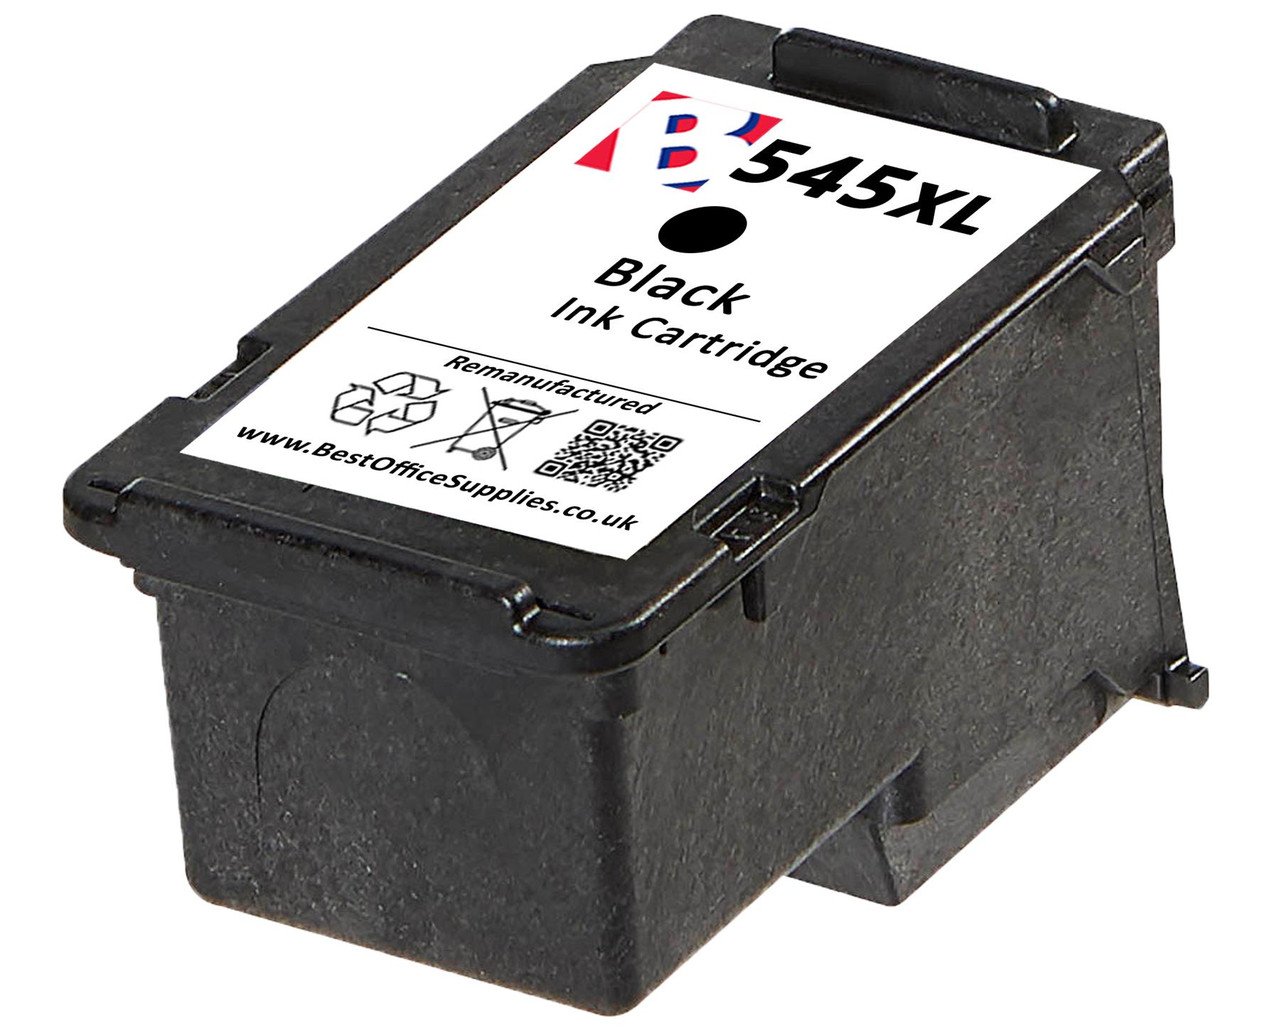 Canon 545XL - SWITCH PG545XL, 8286B001 'ink level' compatible